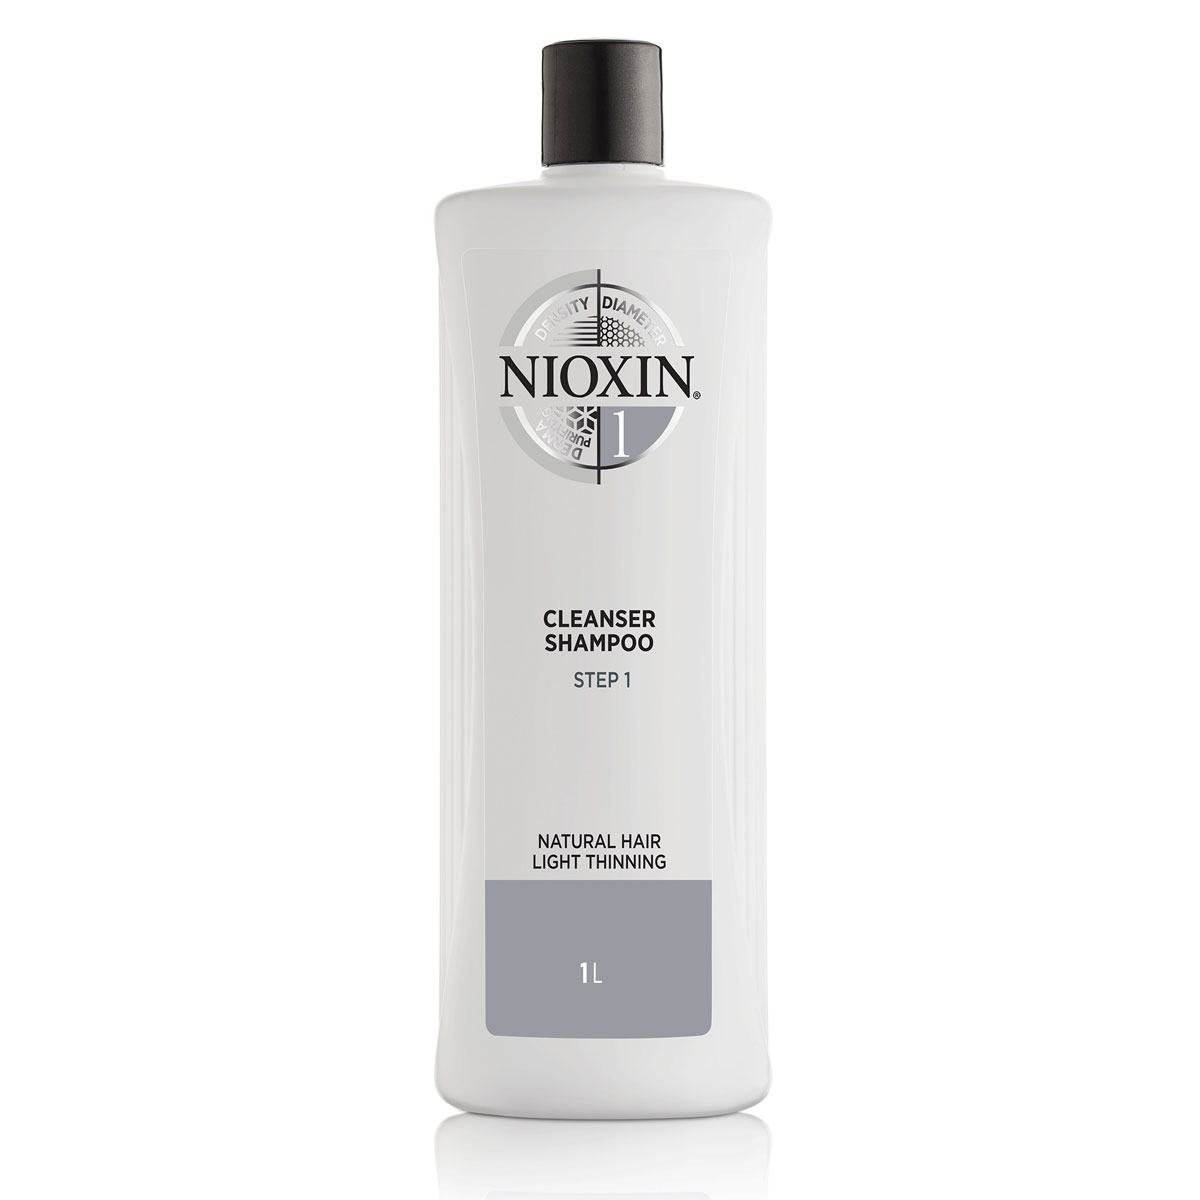 Nioxin 3-Part System 1 Cleanser Shampoo For Natural Hair With Light Thinning 1000Ml